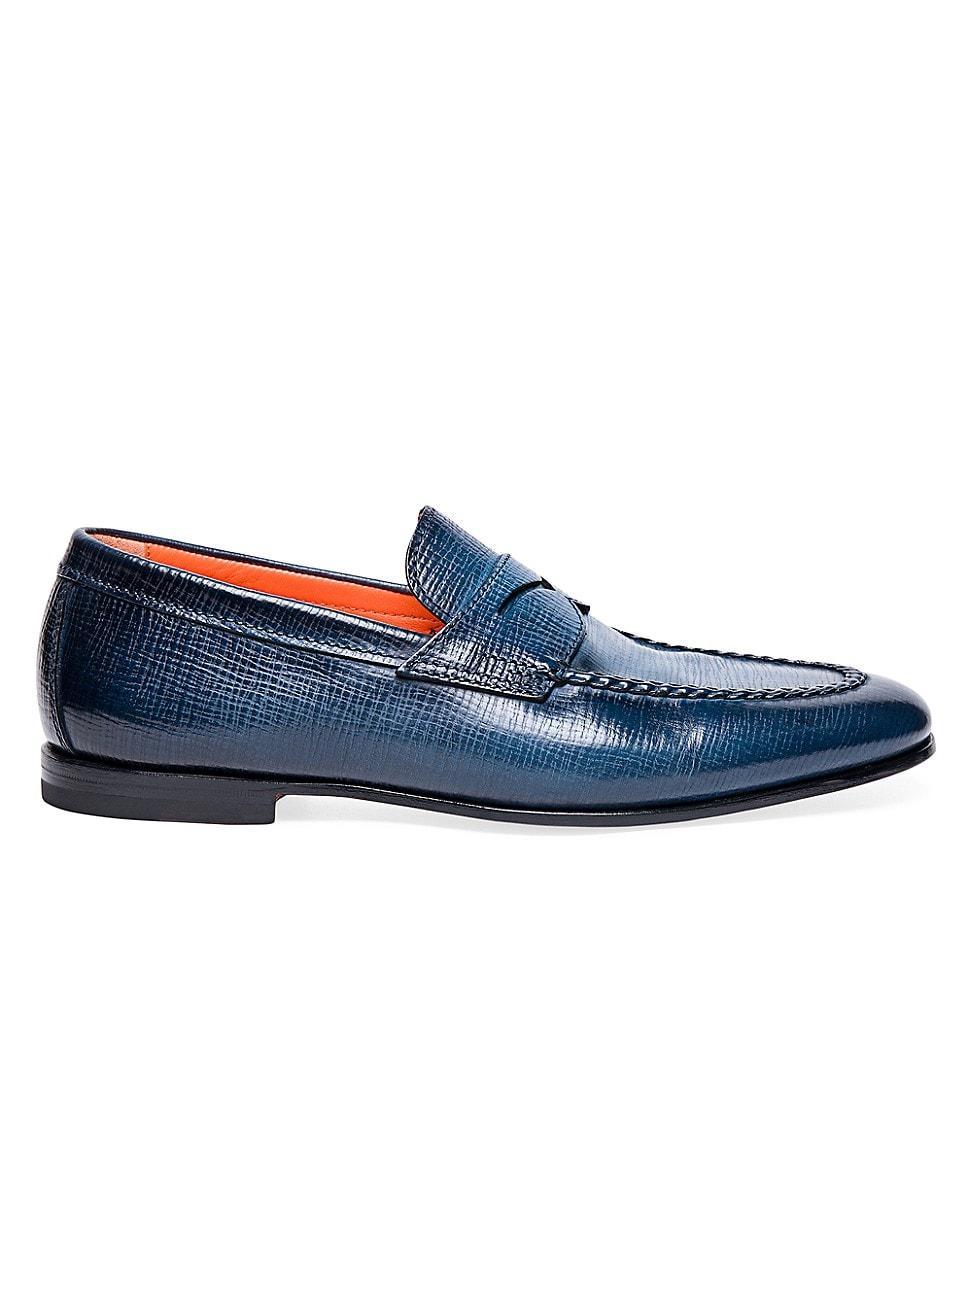 Mens Door Textured Leather Penny Loafers Product Image